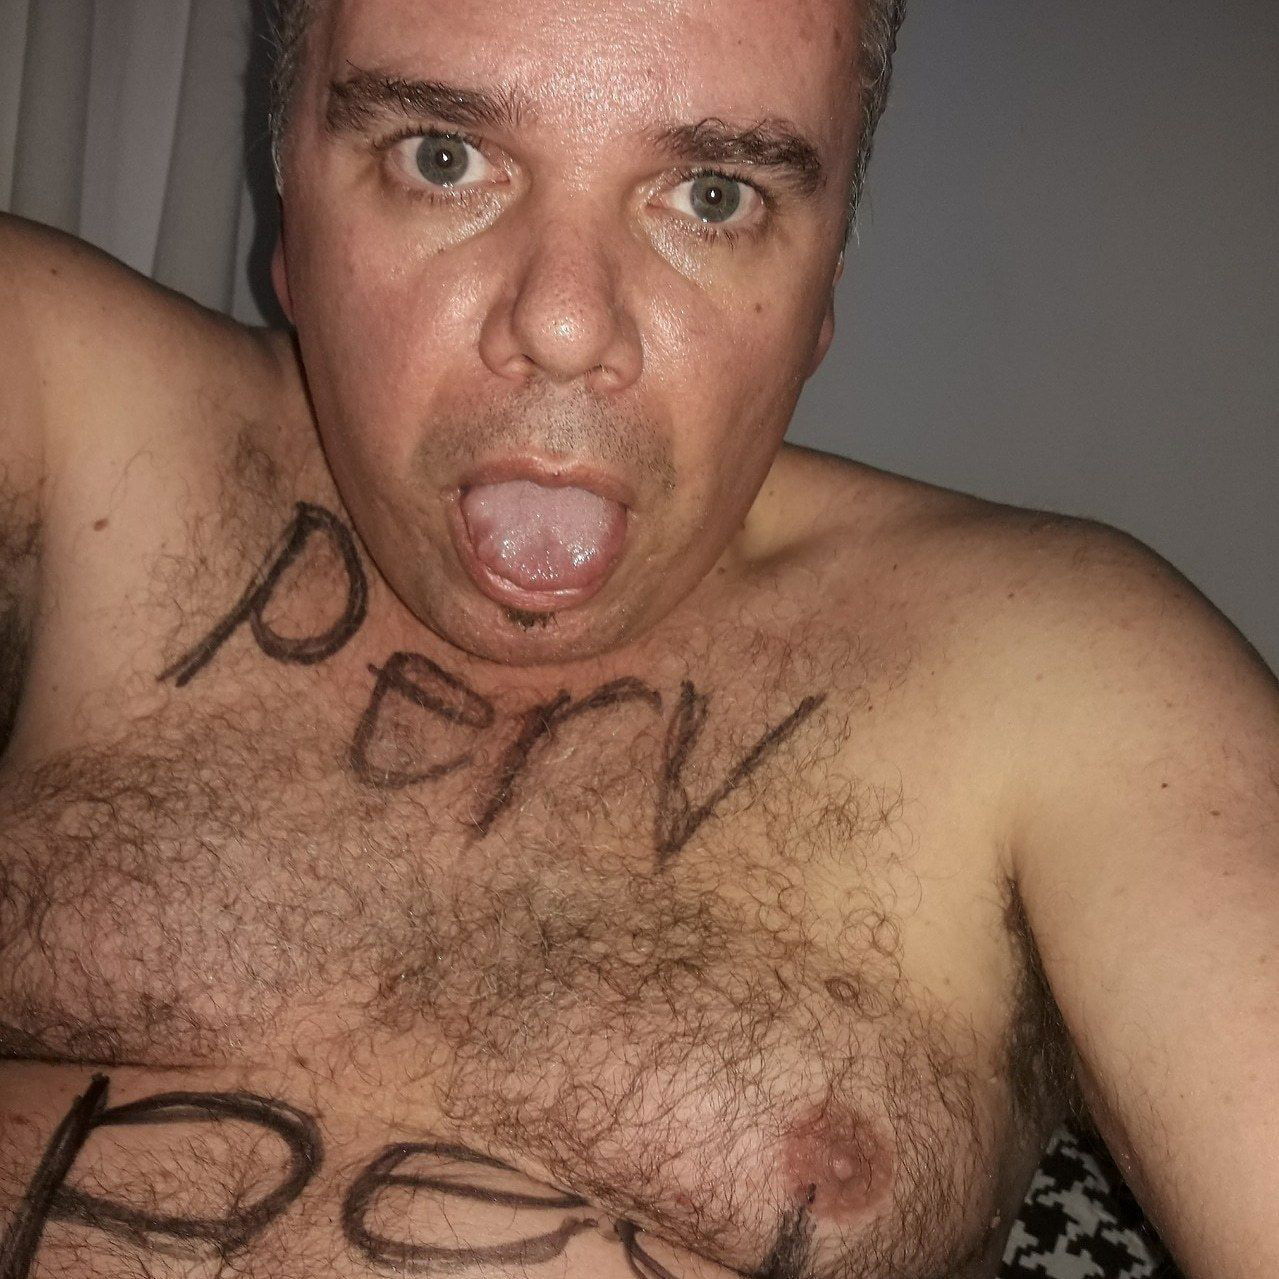 Photo by stefperv with the username @stefperv,  August 6, 2019 at 11:36 PM. The post is about the topic Fag Exposure and the text says 'Who wants to expose me?????'